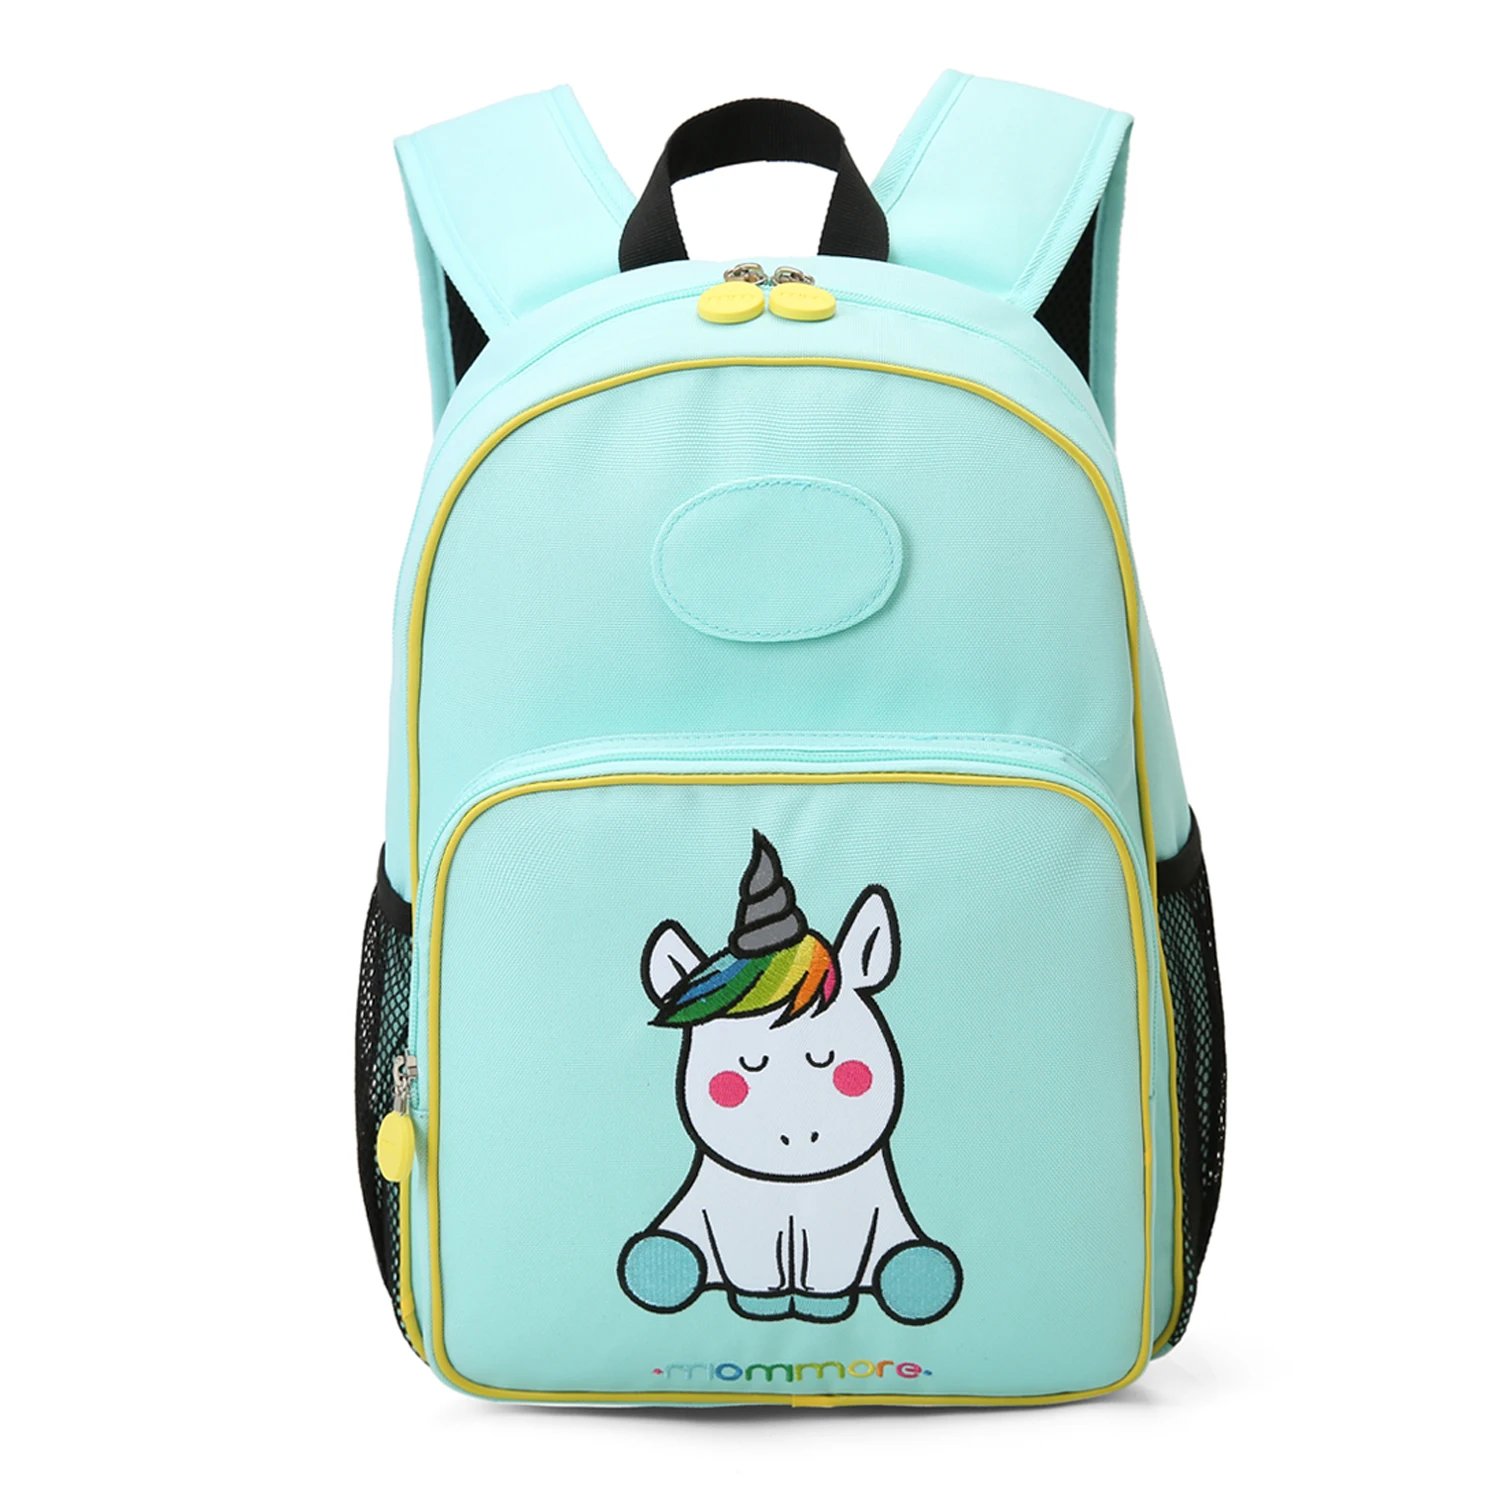 

Cute animal kids backpack cartoon school bag with lunch box for kids girls unicorn, Can be customizer